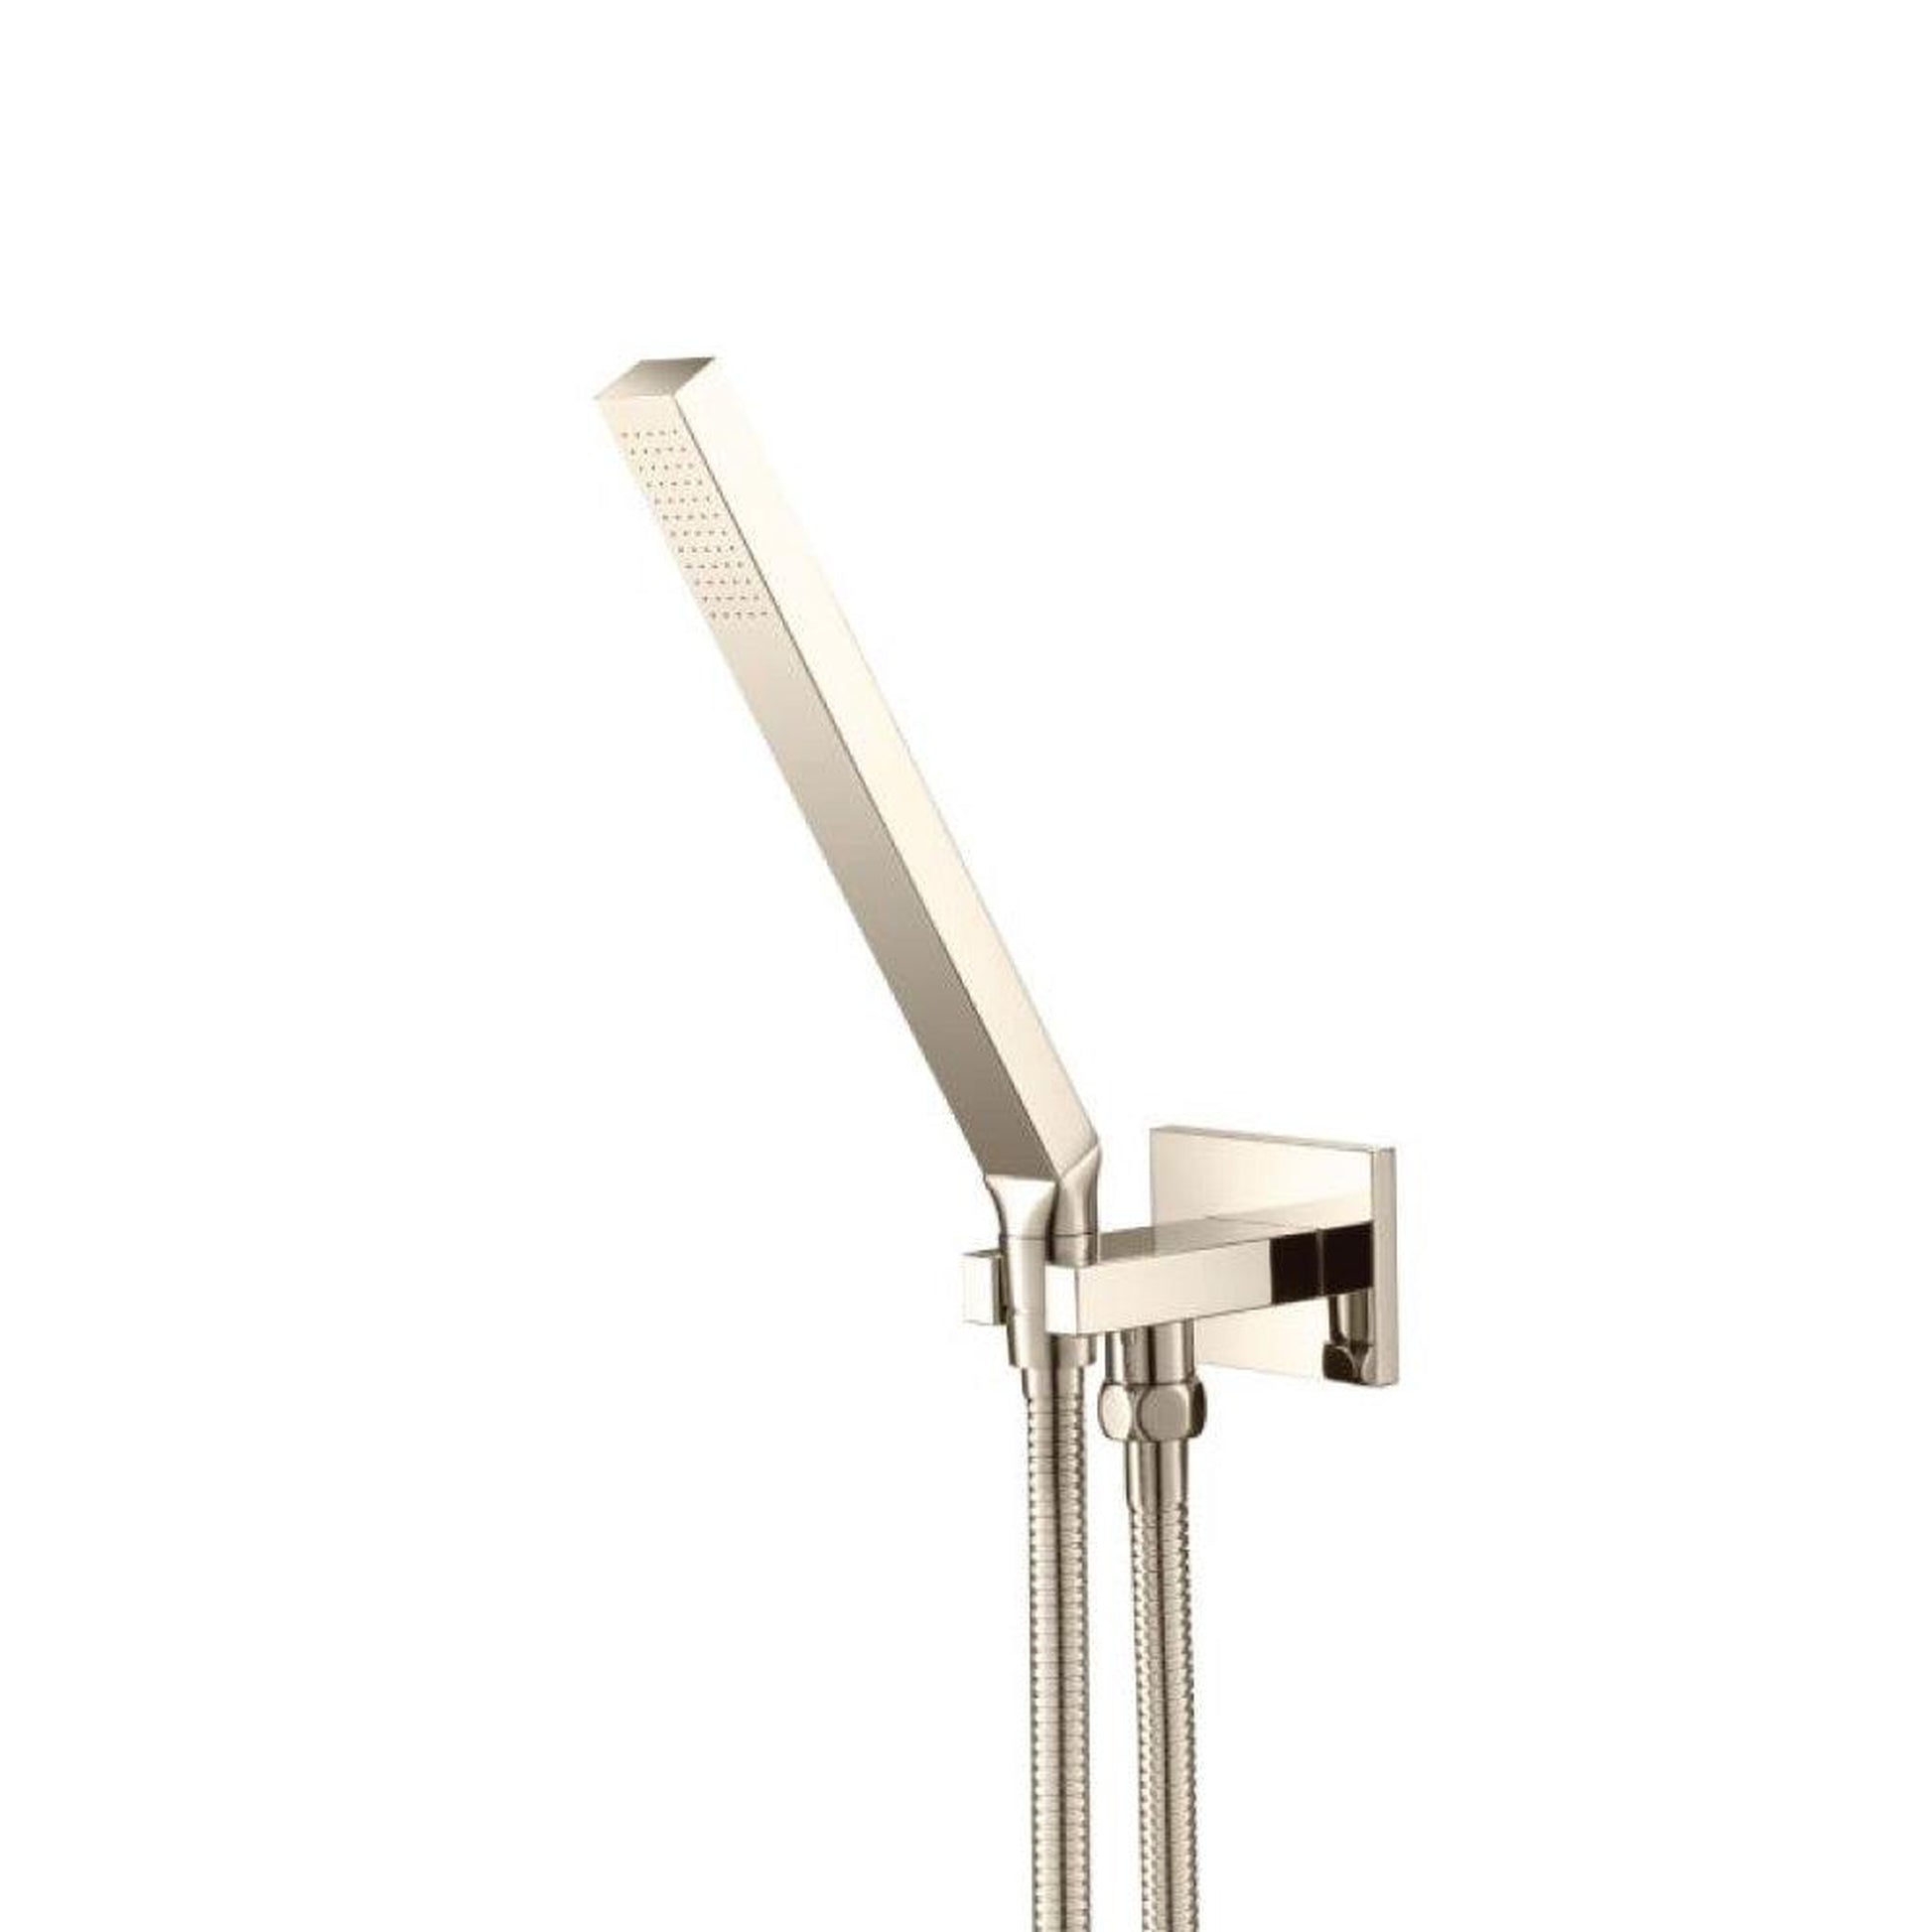 Isenberg Universal Fixtures Hand Shower Set With Wall Elbow, Holder and Hose in Polished Nickel (HS1003PN)